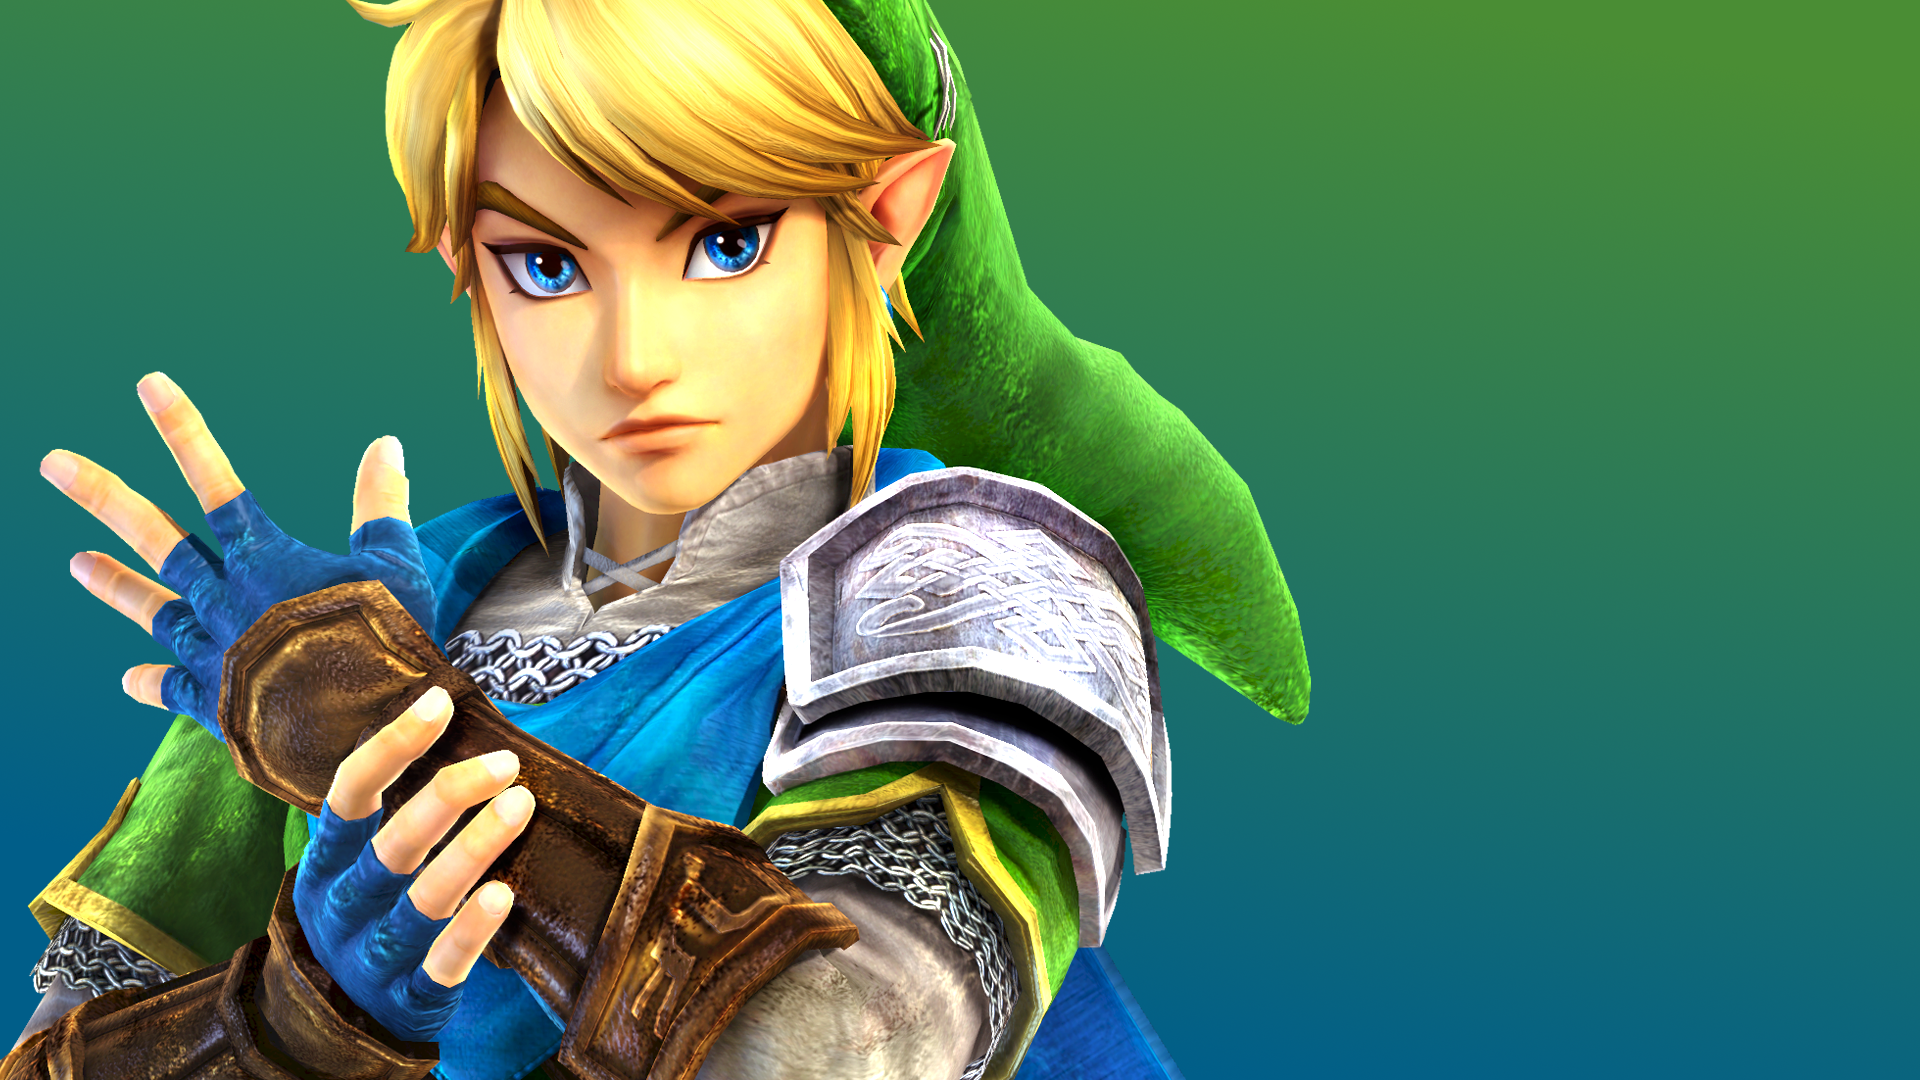 Link Hyrule Warriors Wallpaper Color By Machriderz